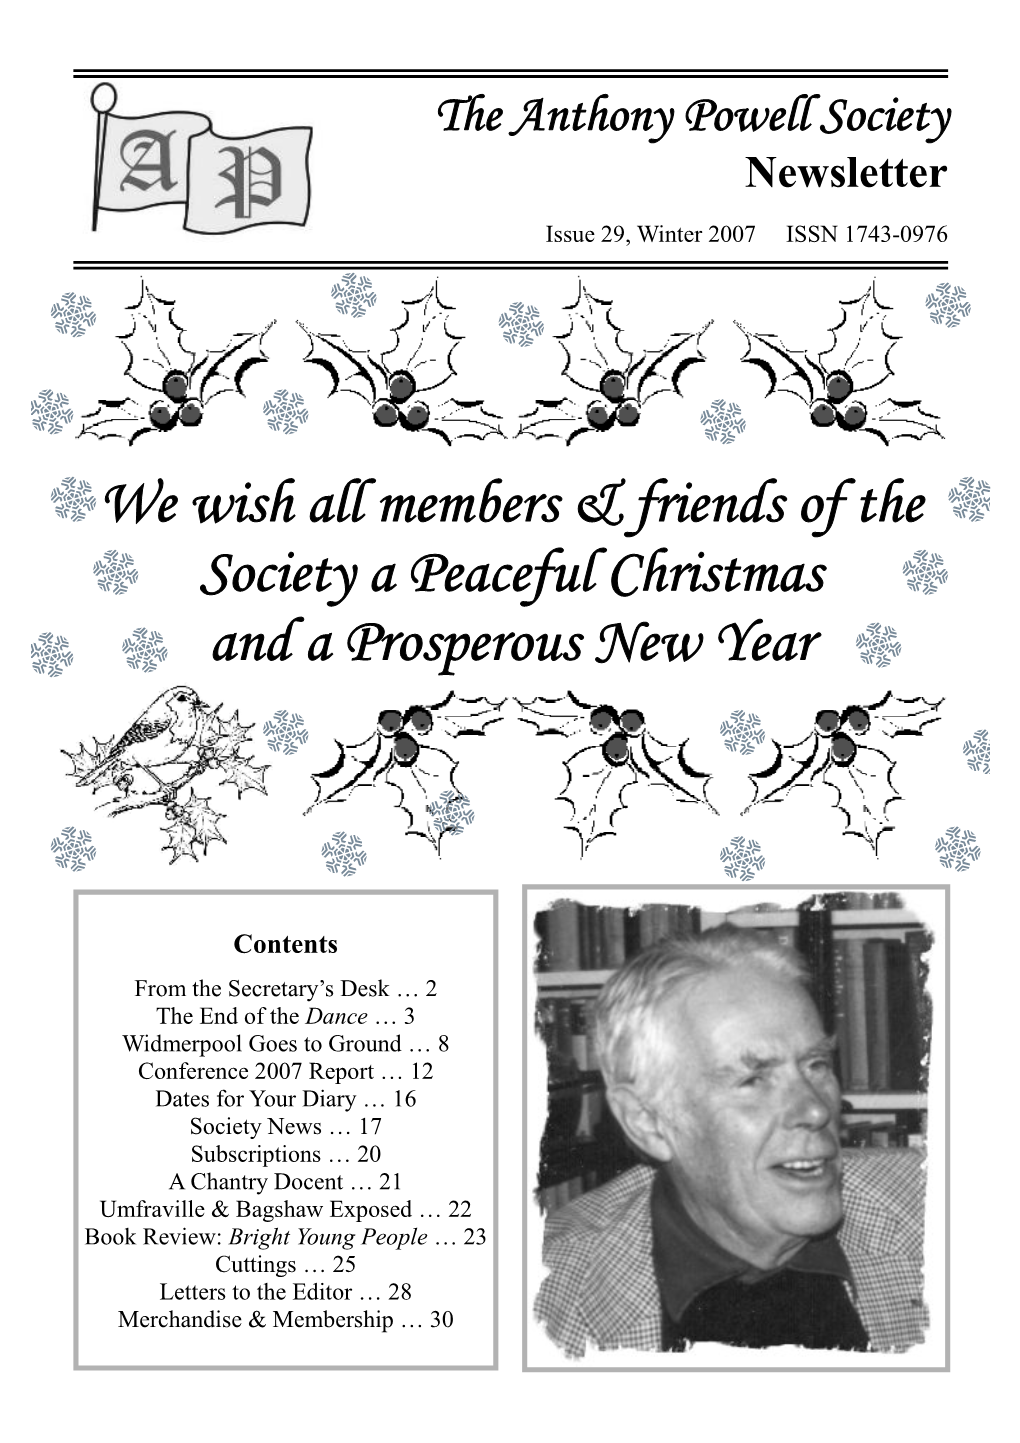 We Wish All Members & Friends of the Society a Peaceful Christmas and A